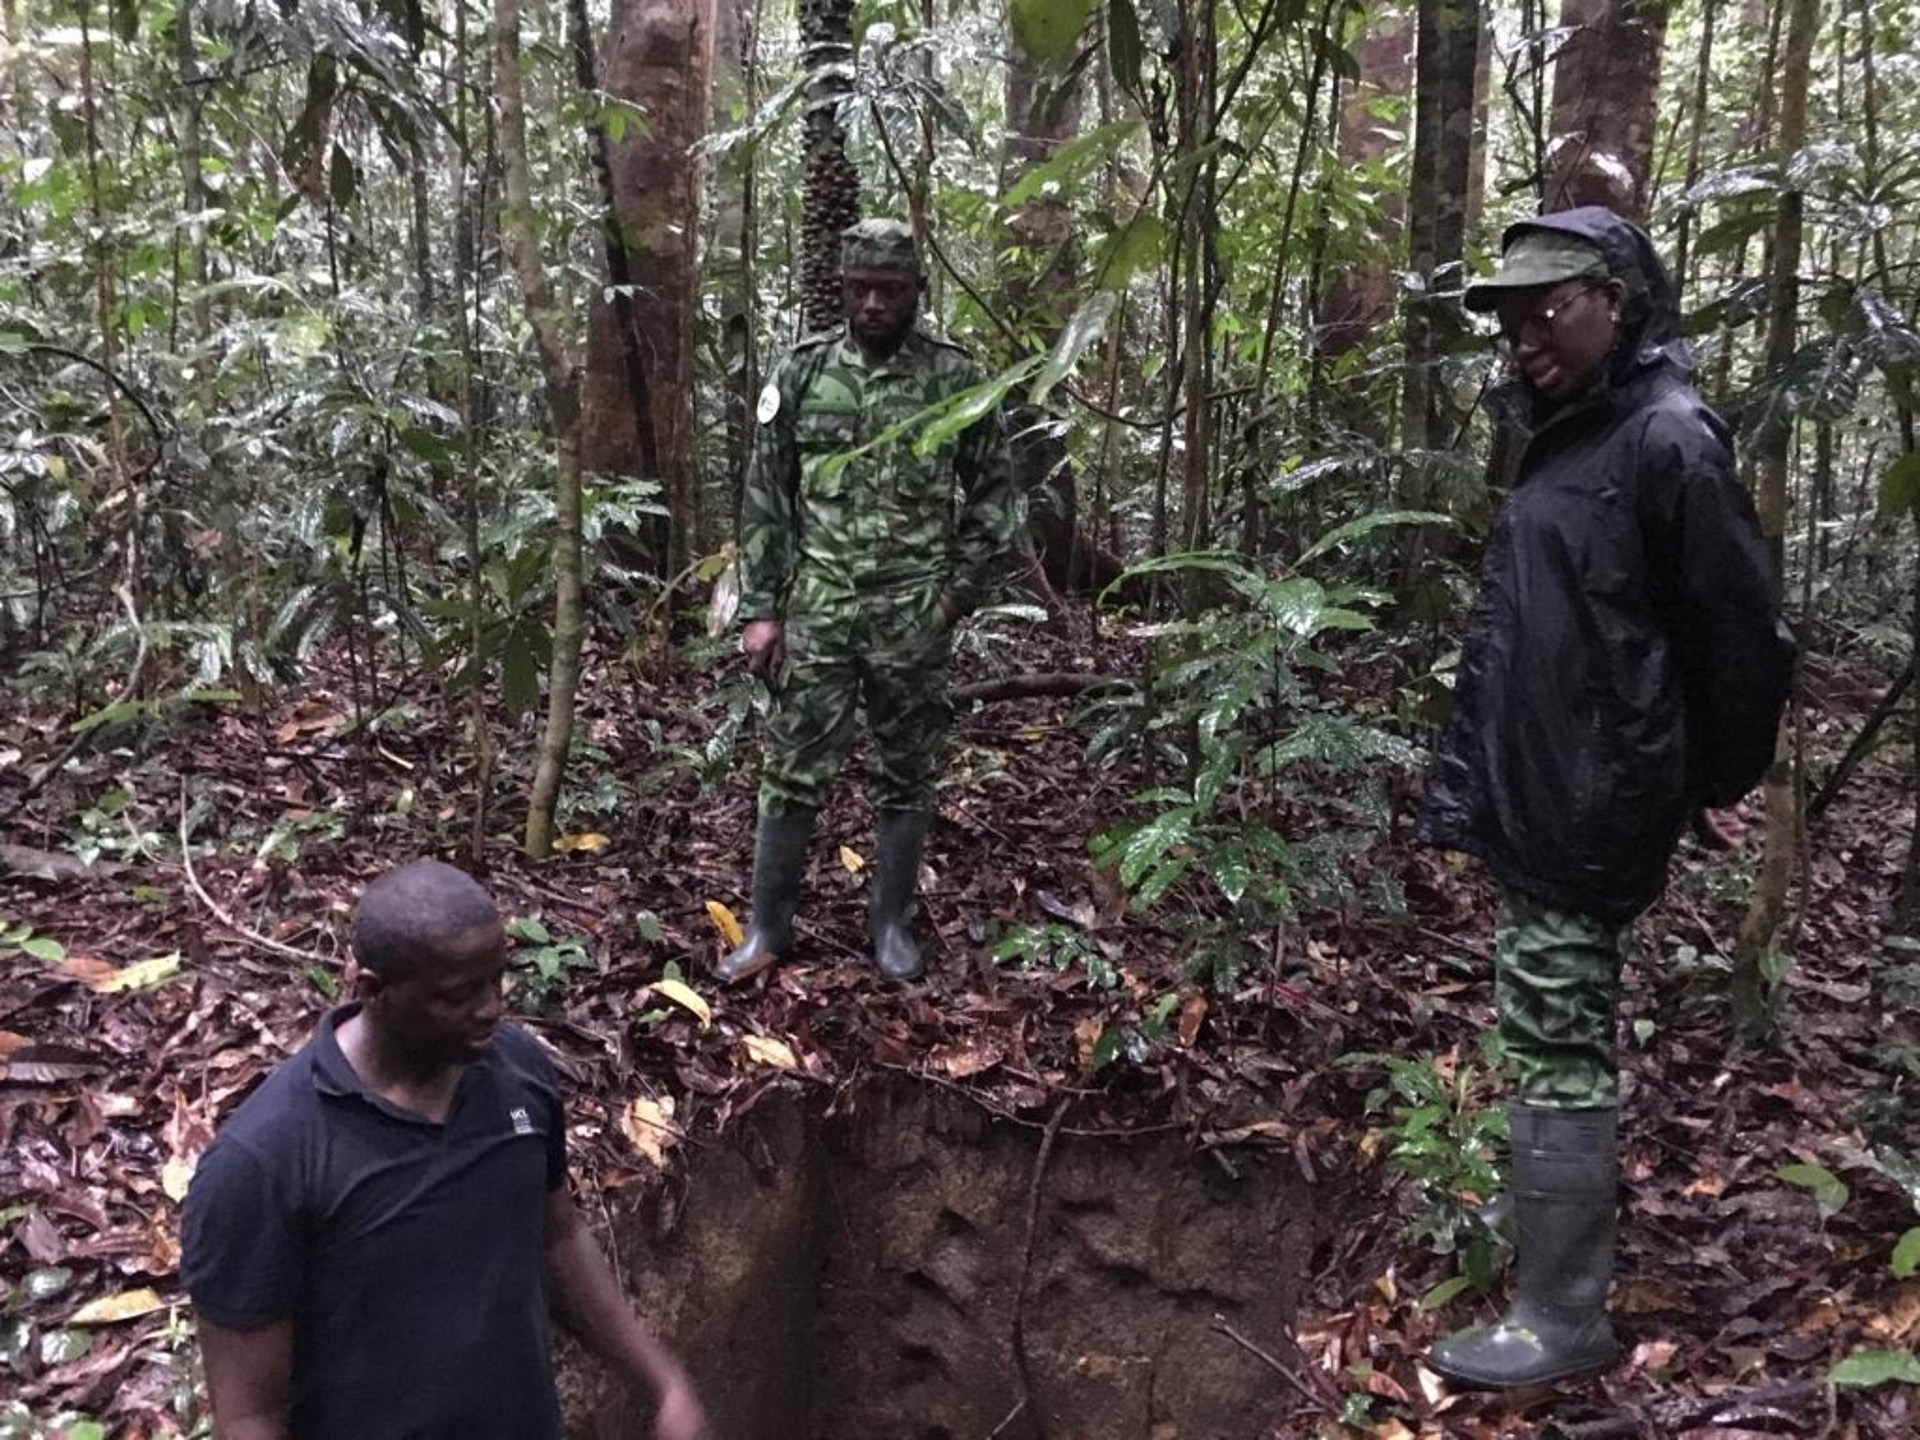 CAFI Dialogues Photo - Members of Gabon's National Agency for Nature measuring carbon in trees litter soil and underground biomass